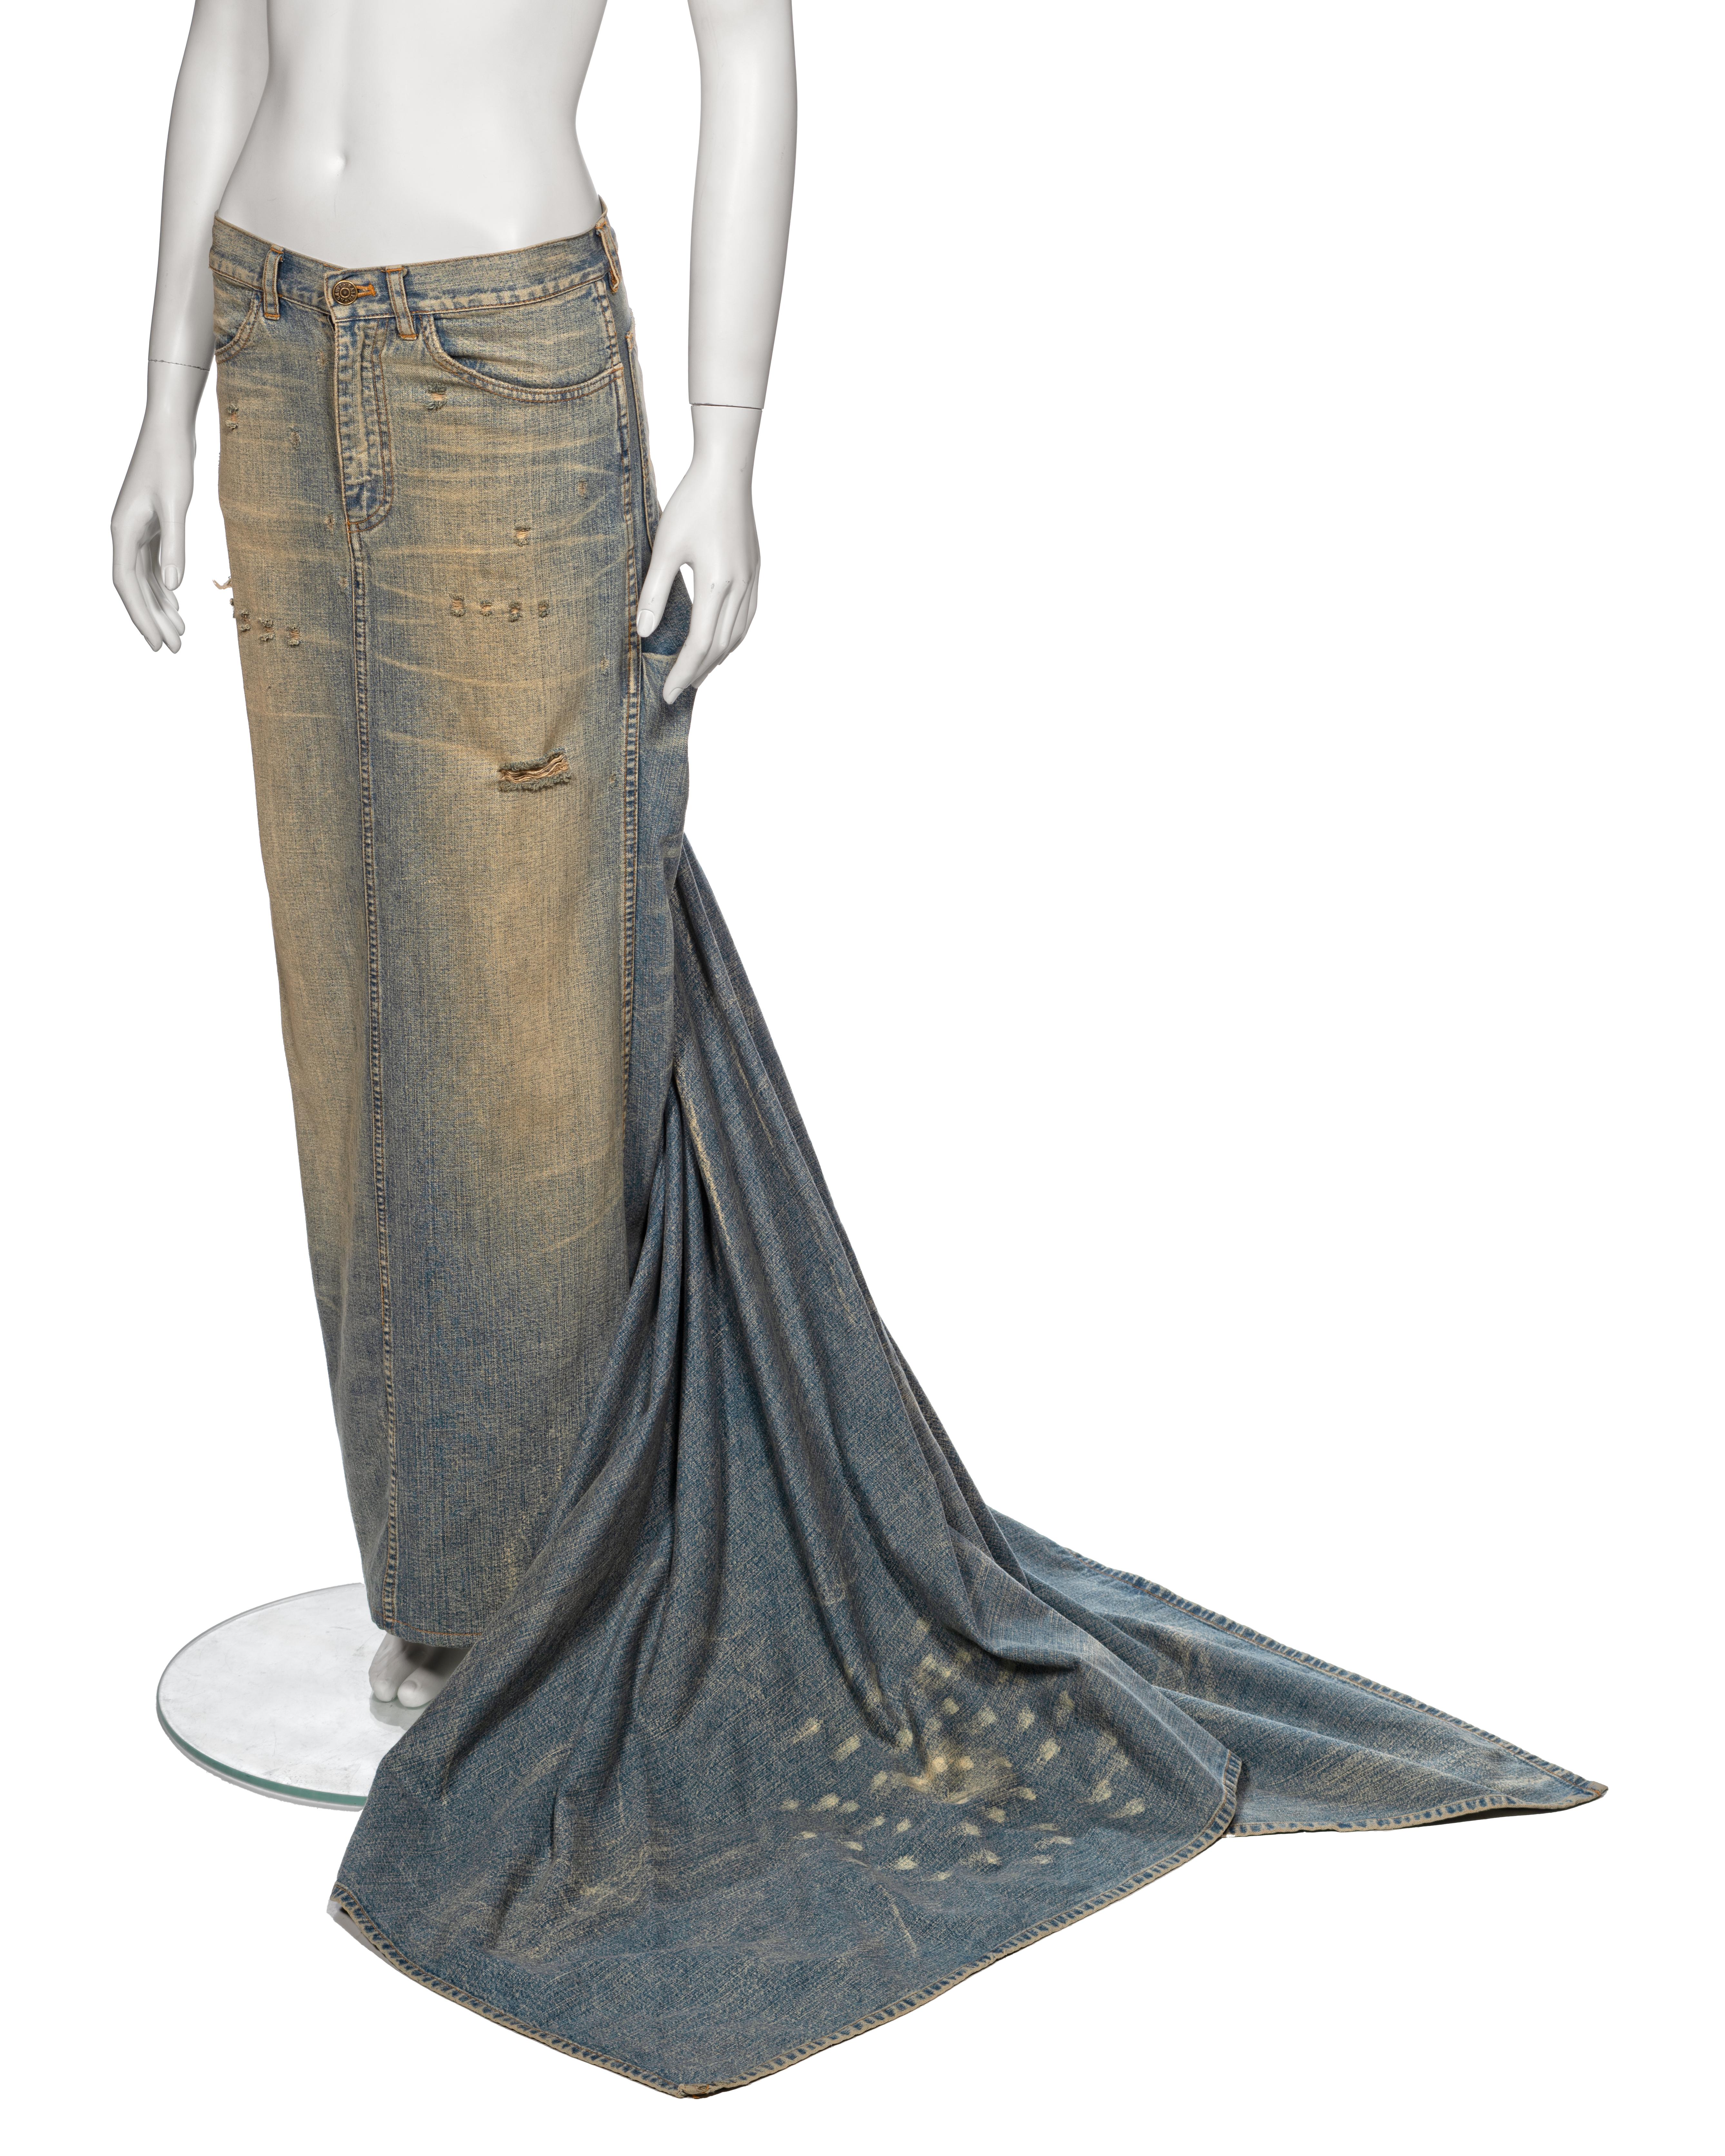 Ralph Lauren Distressed Sand Washed Denim Maxi Skirt with Train, ss 2003 For Sale 7